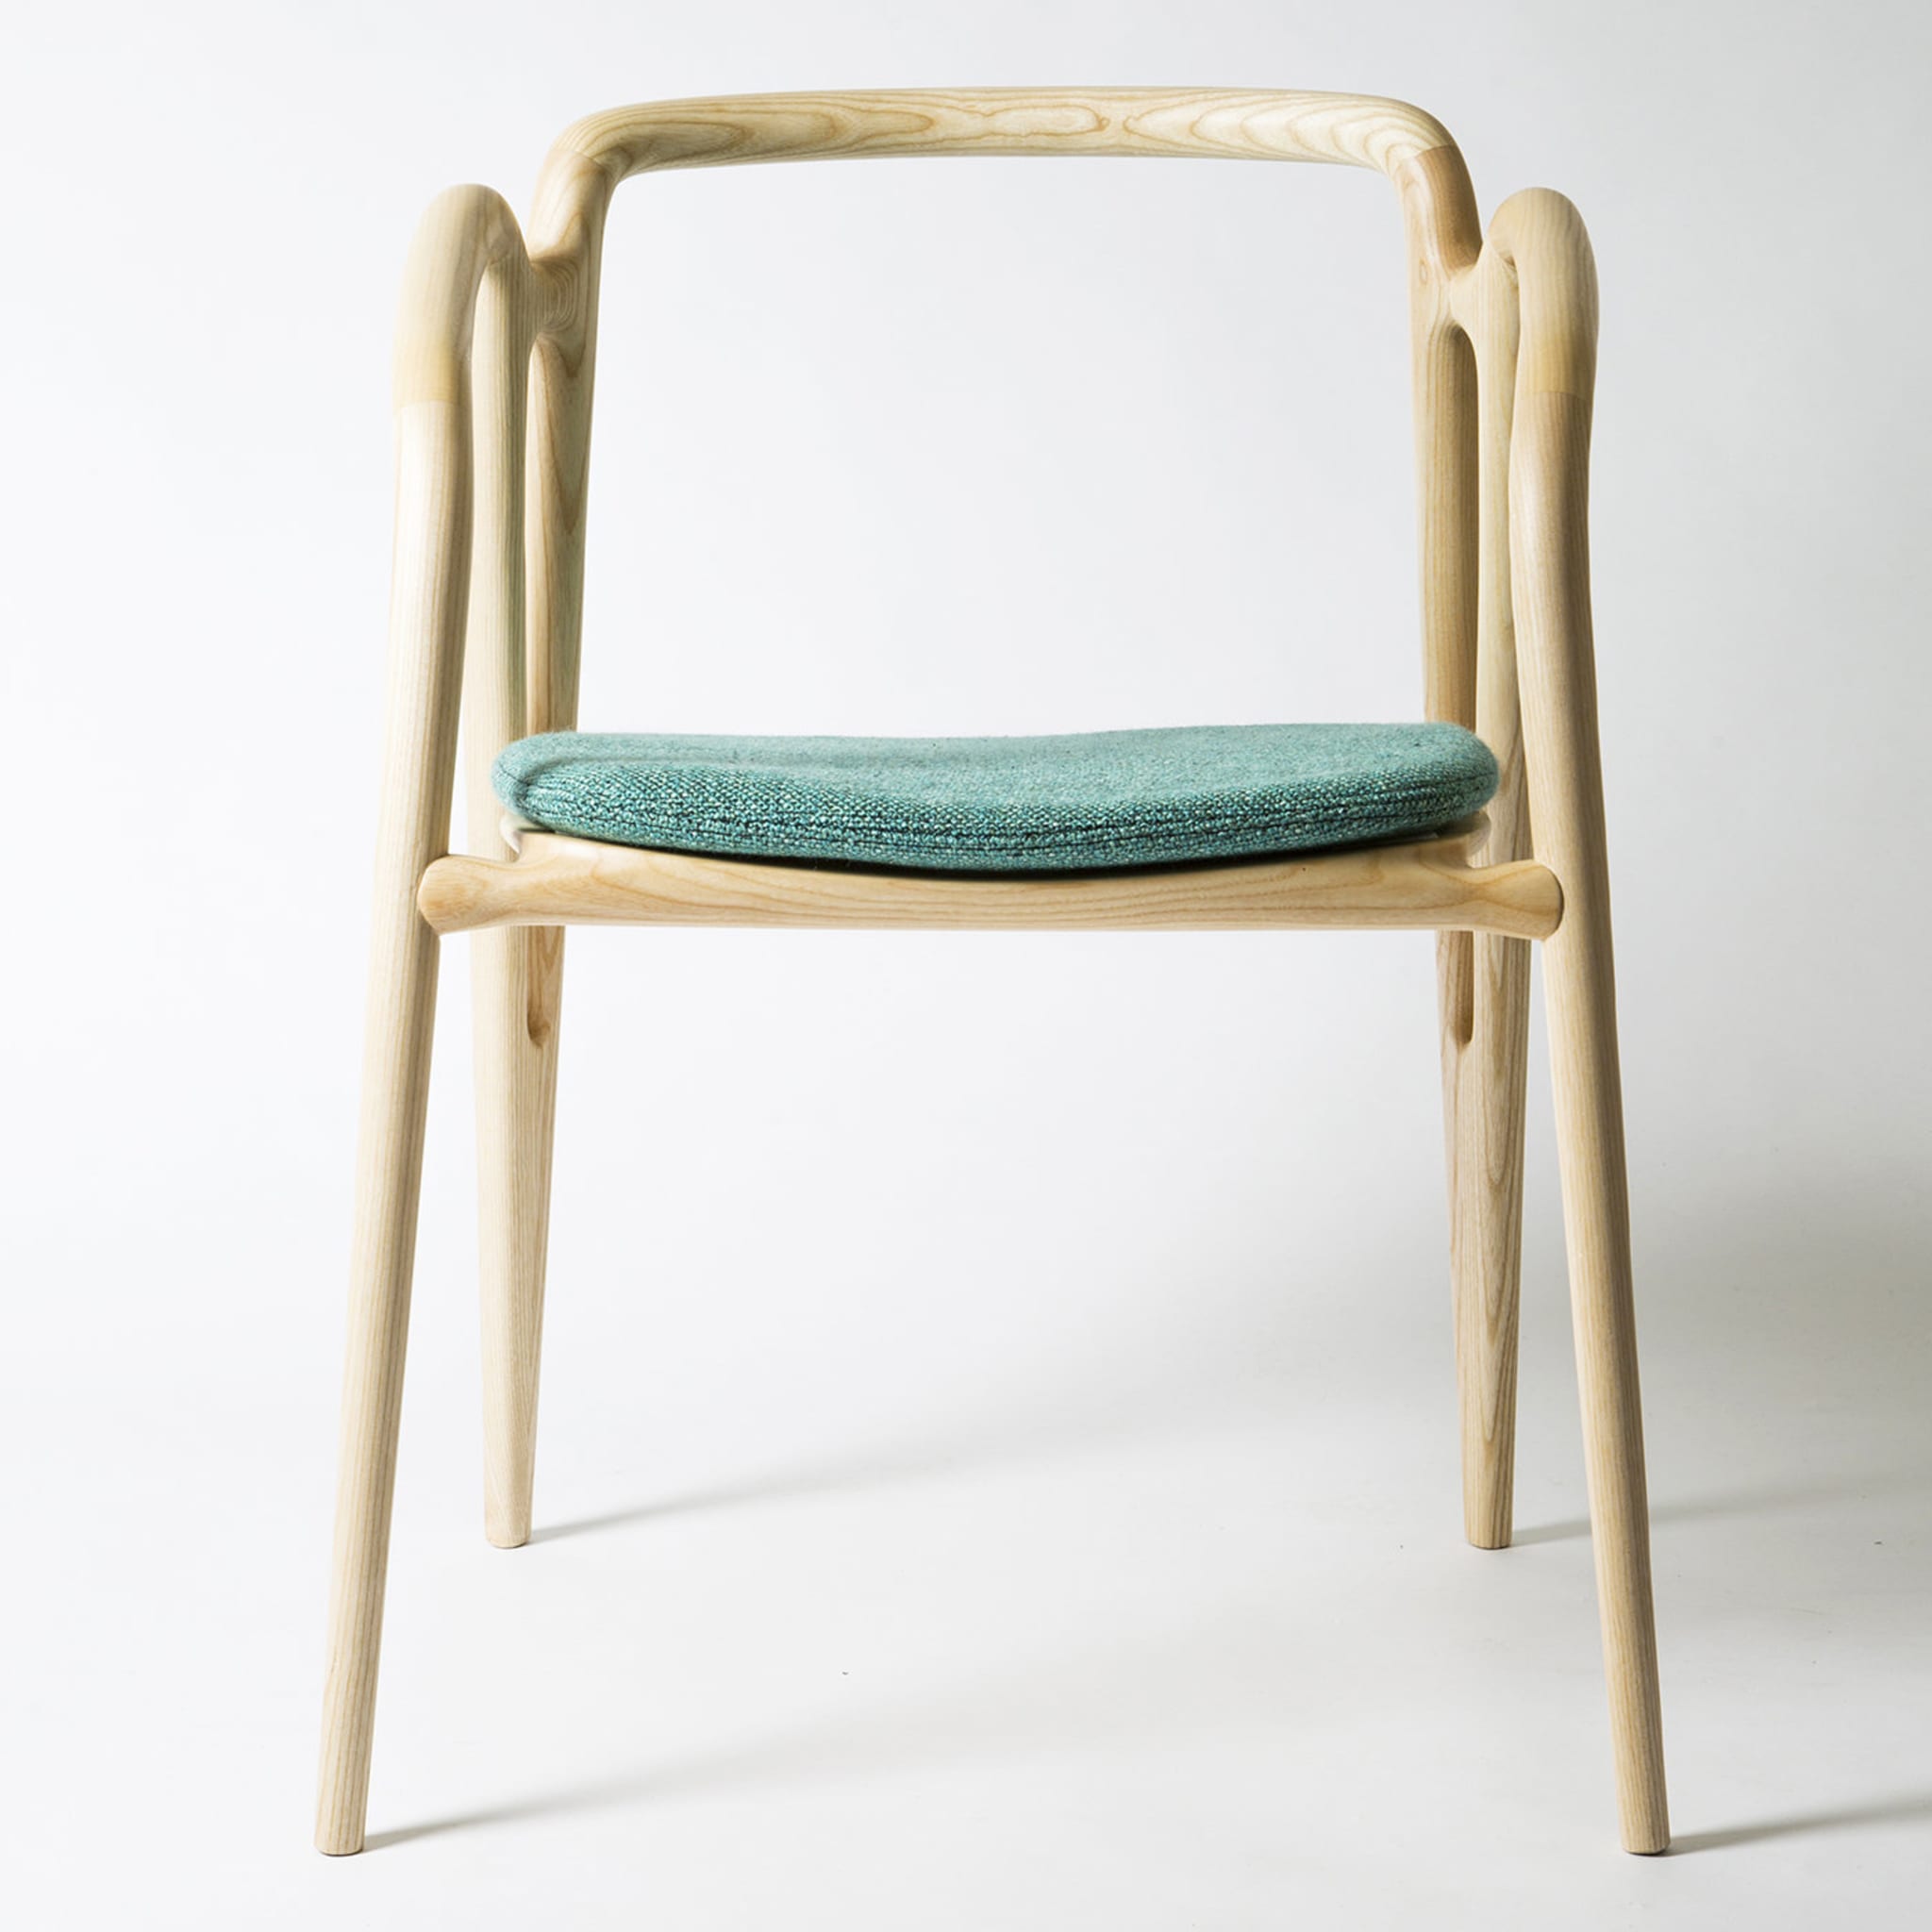 Vivo Chair with Turquoise Cushion - Alternative view 3